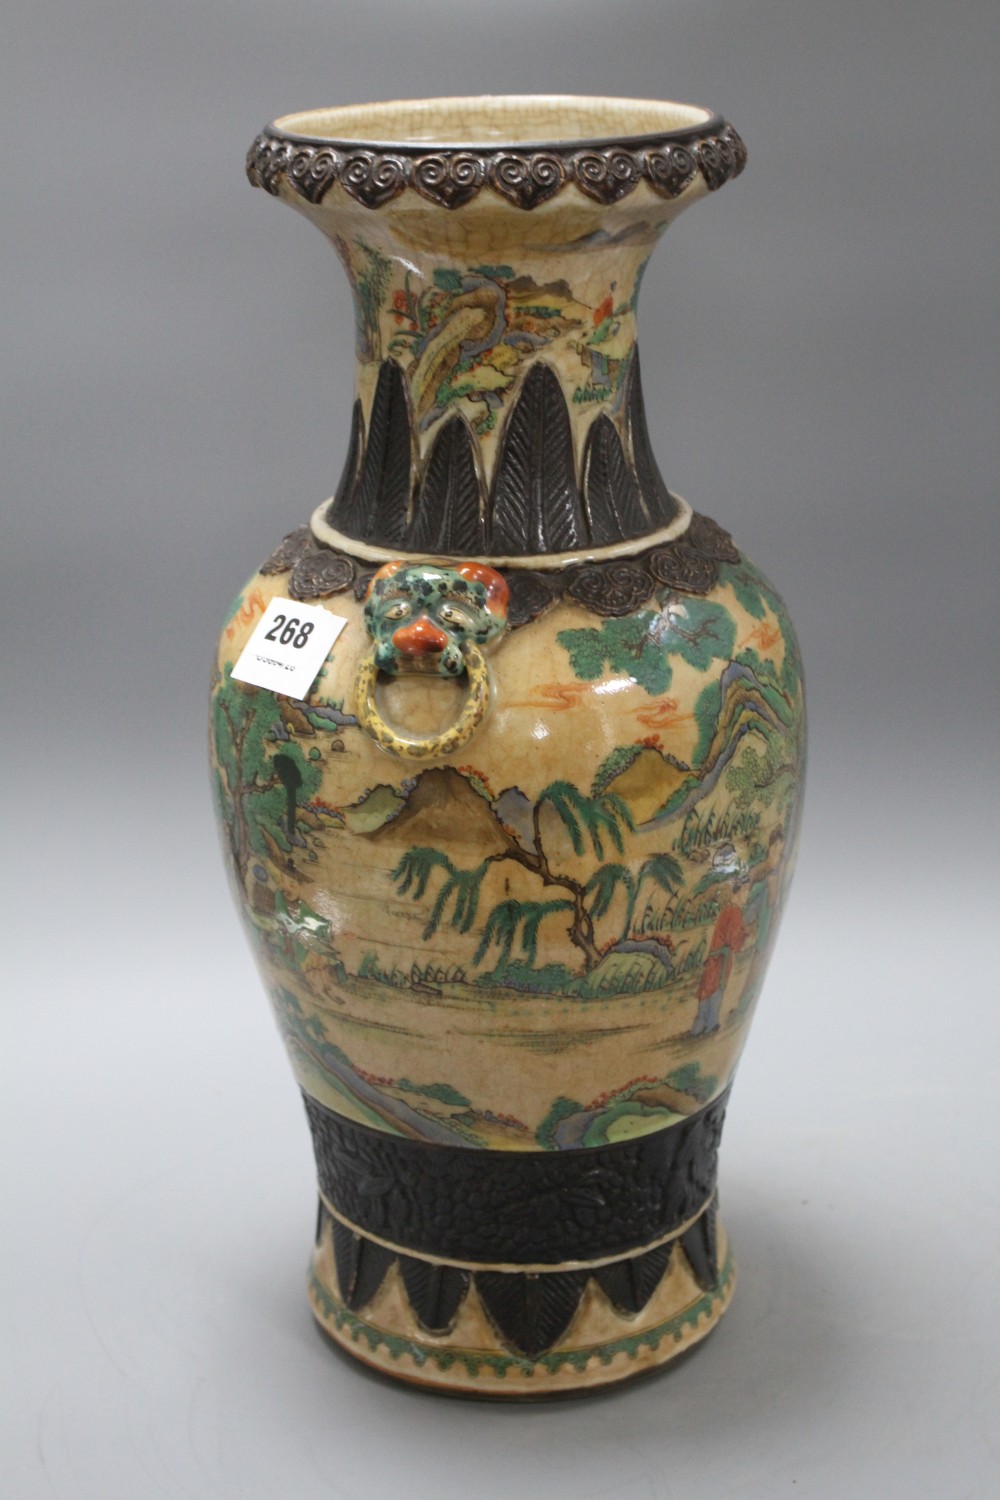 A late 19th century Chinese crackle glaze vase, decorated with figures in a continuous landscape, height 46cm